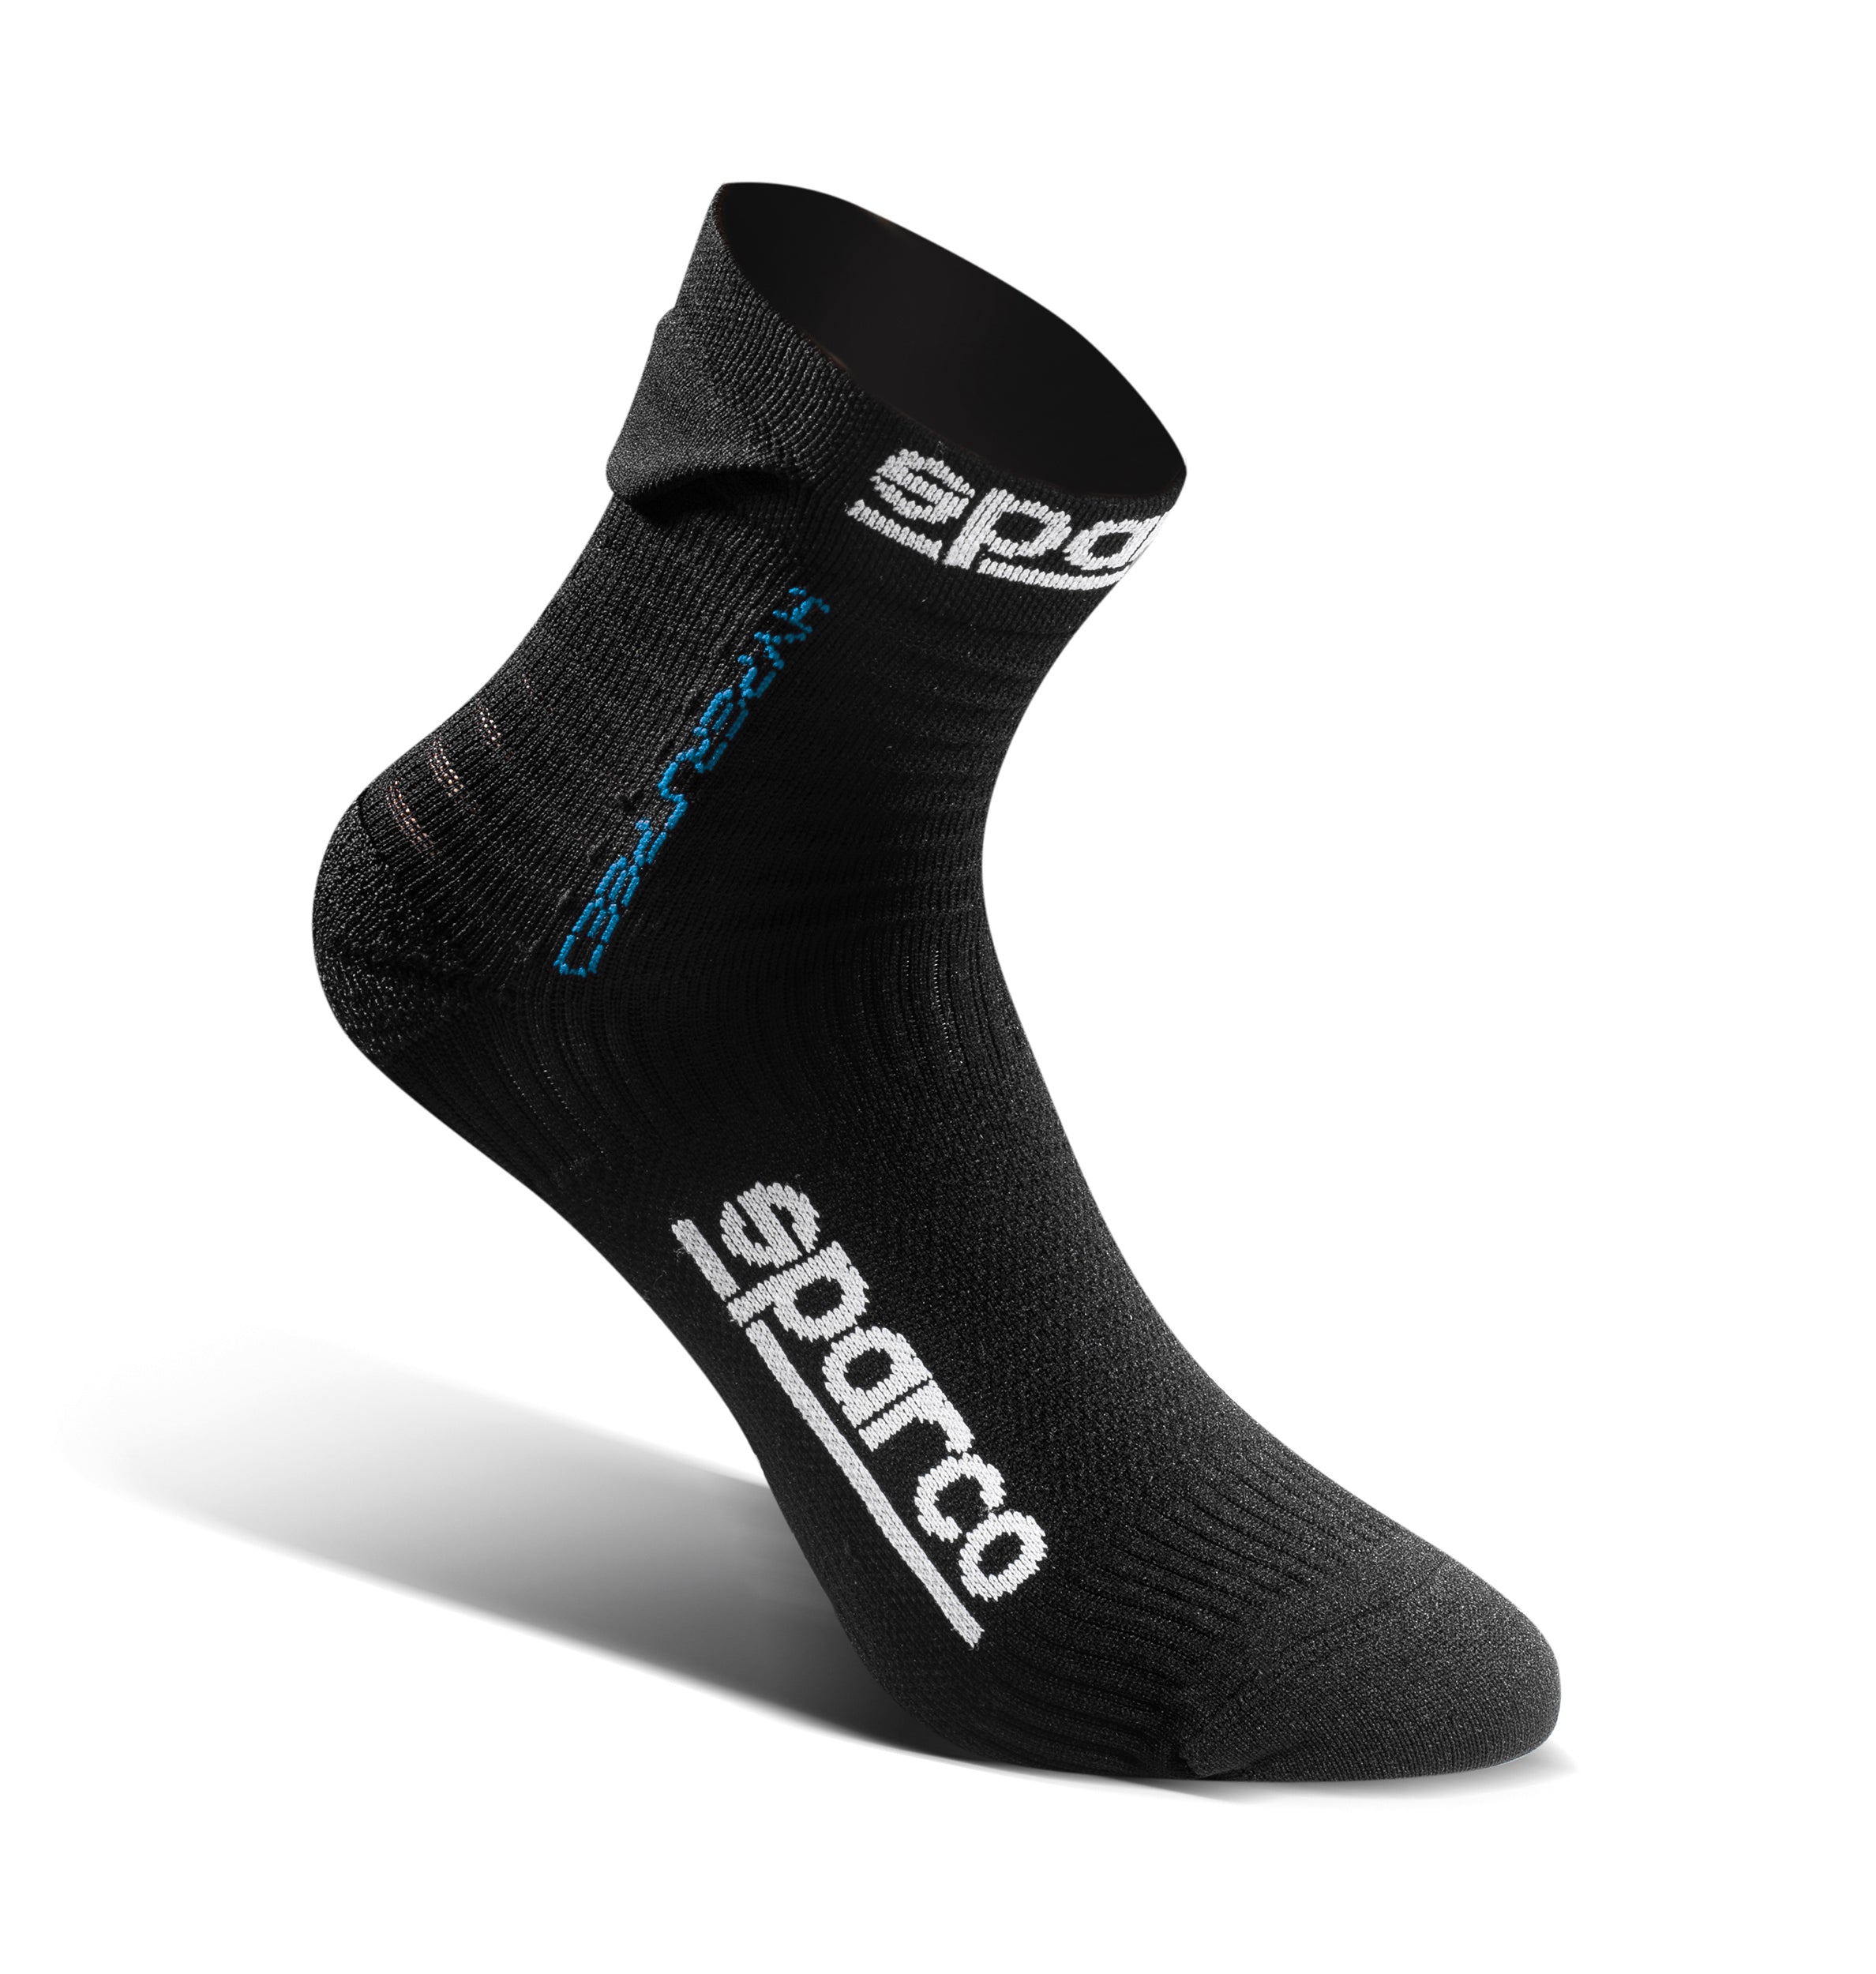 SPARCO 01290NRAZ4647 Driving socks HYPERSPEED, black/blue, size 46/47 Photo-0 